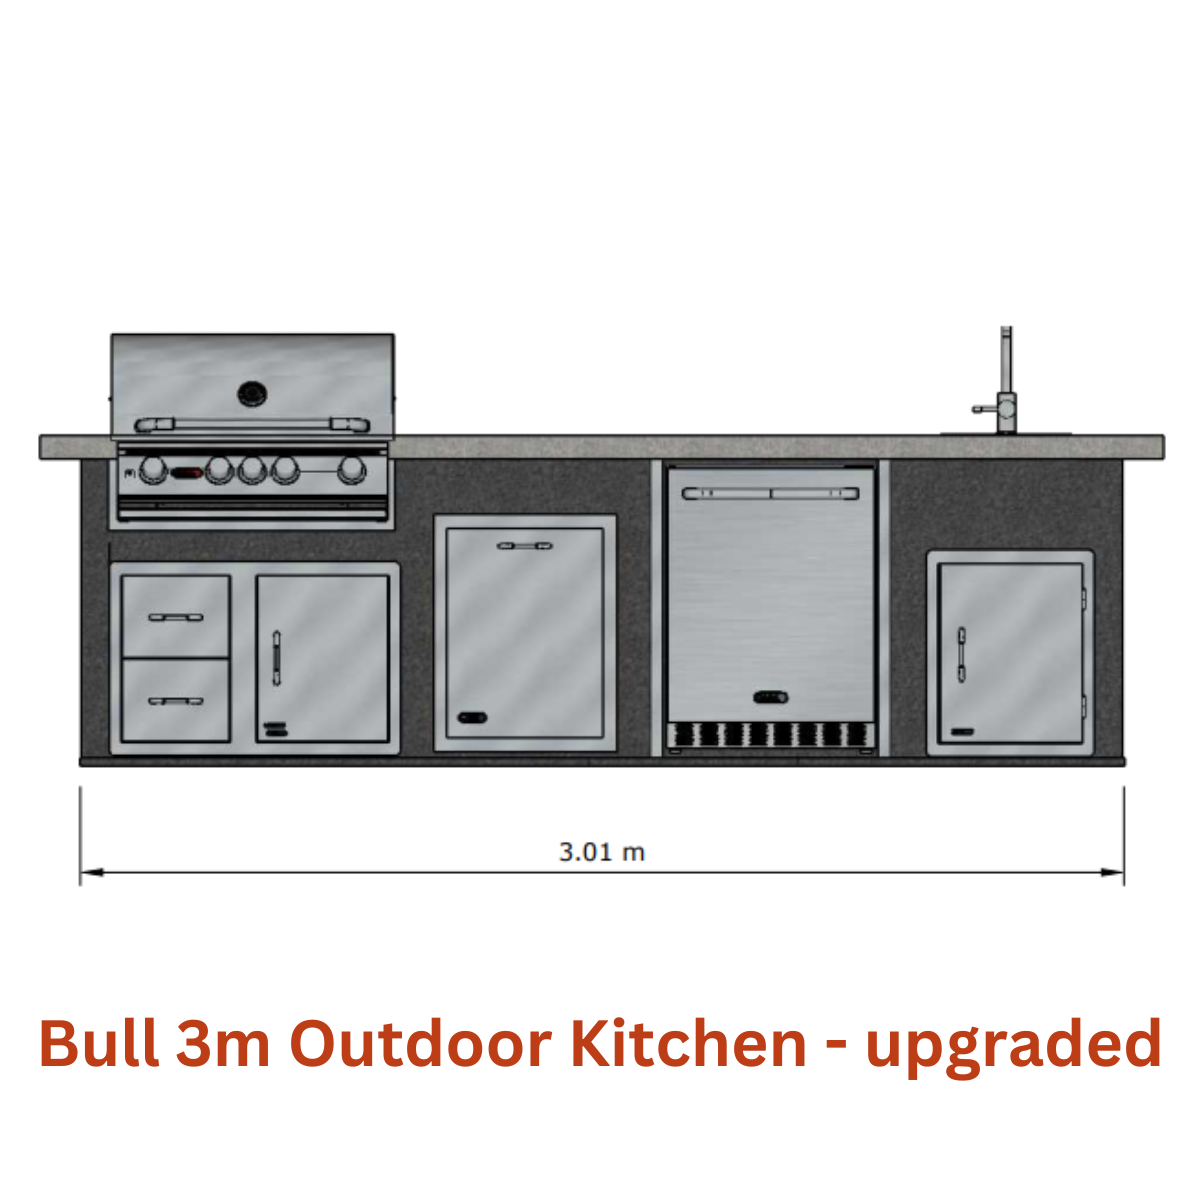 Bull 3m ODK - upgraded. Available from Kitchen in the Garden, Surrey